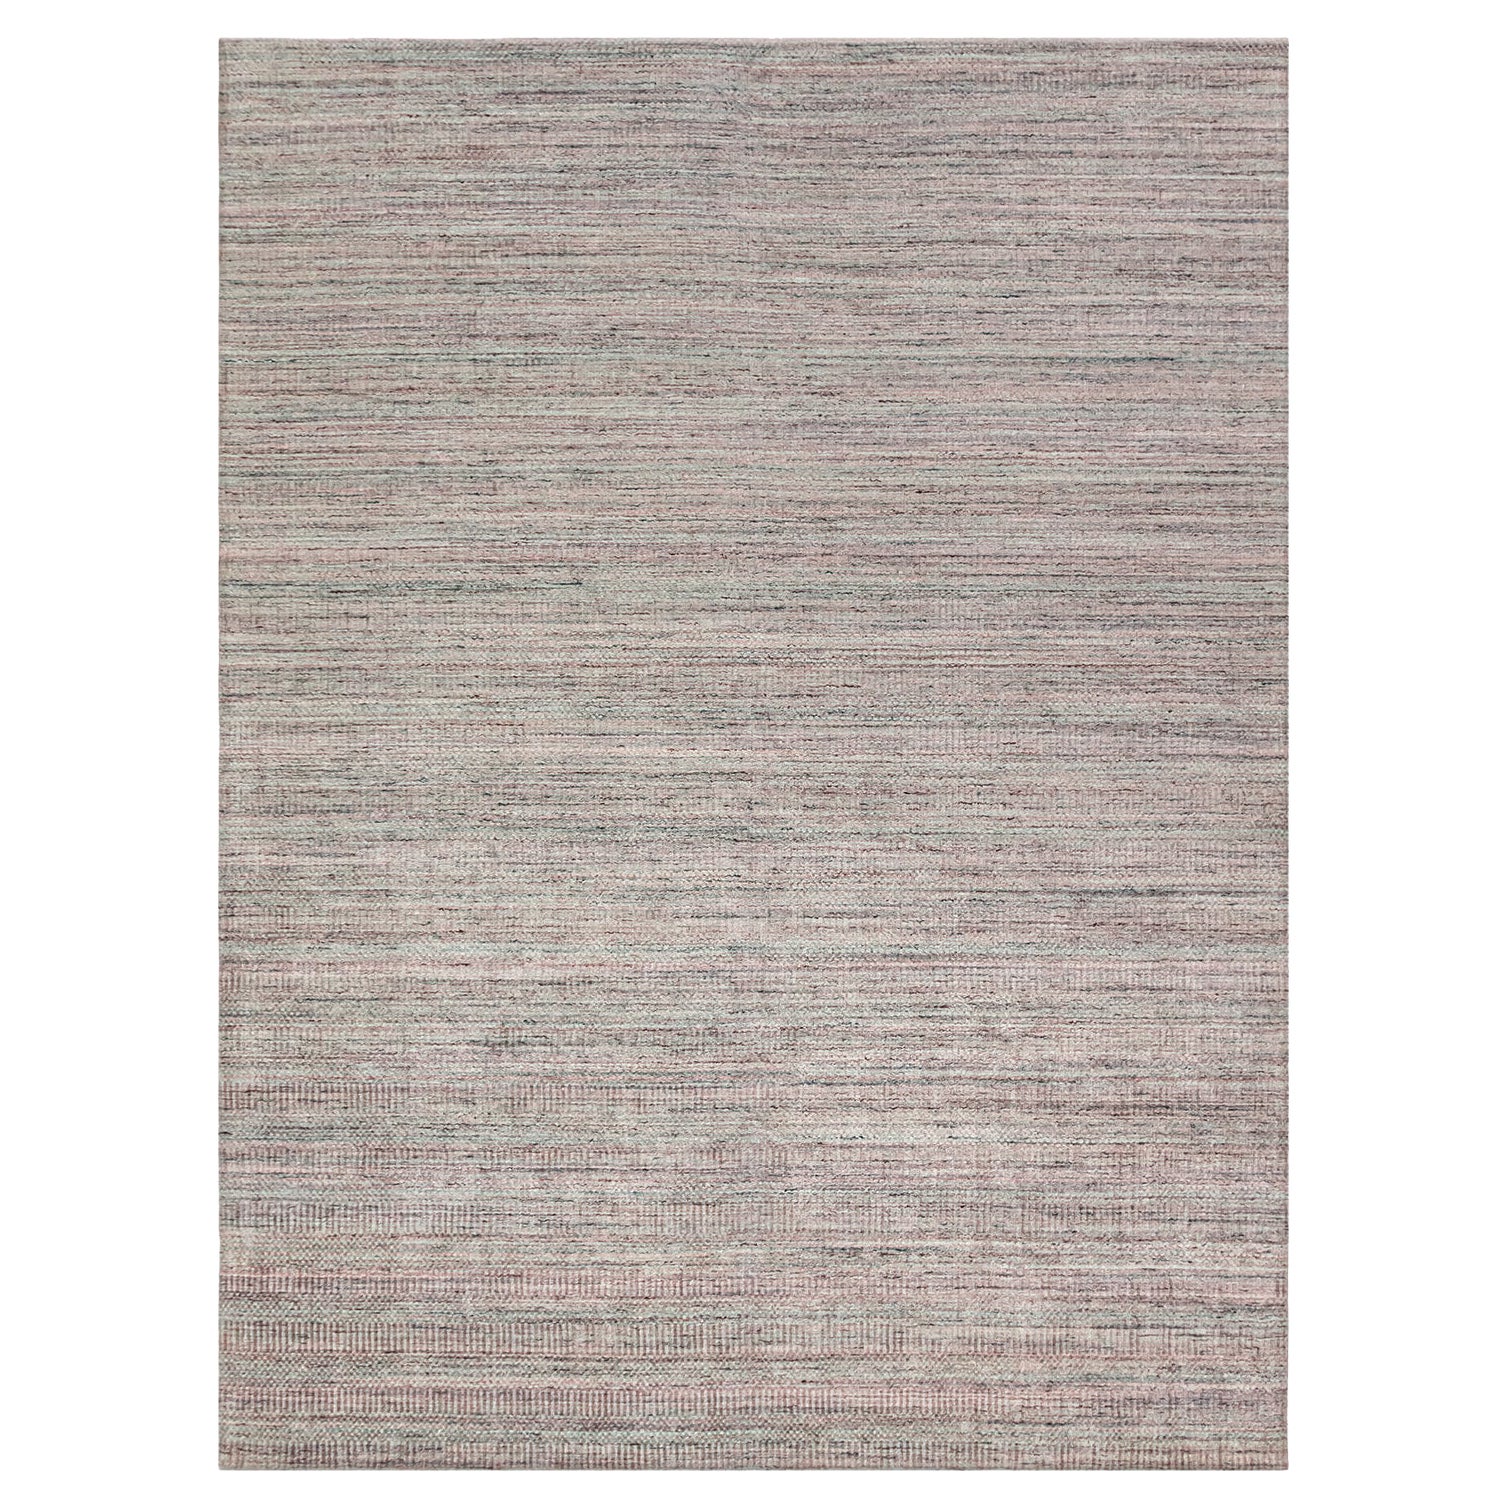 Simplicity Comfort Pink Turquoise Contemporary Handwoven Rug  9'2 x 12' For Sale